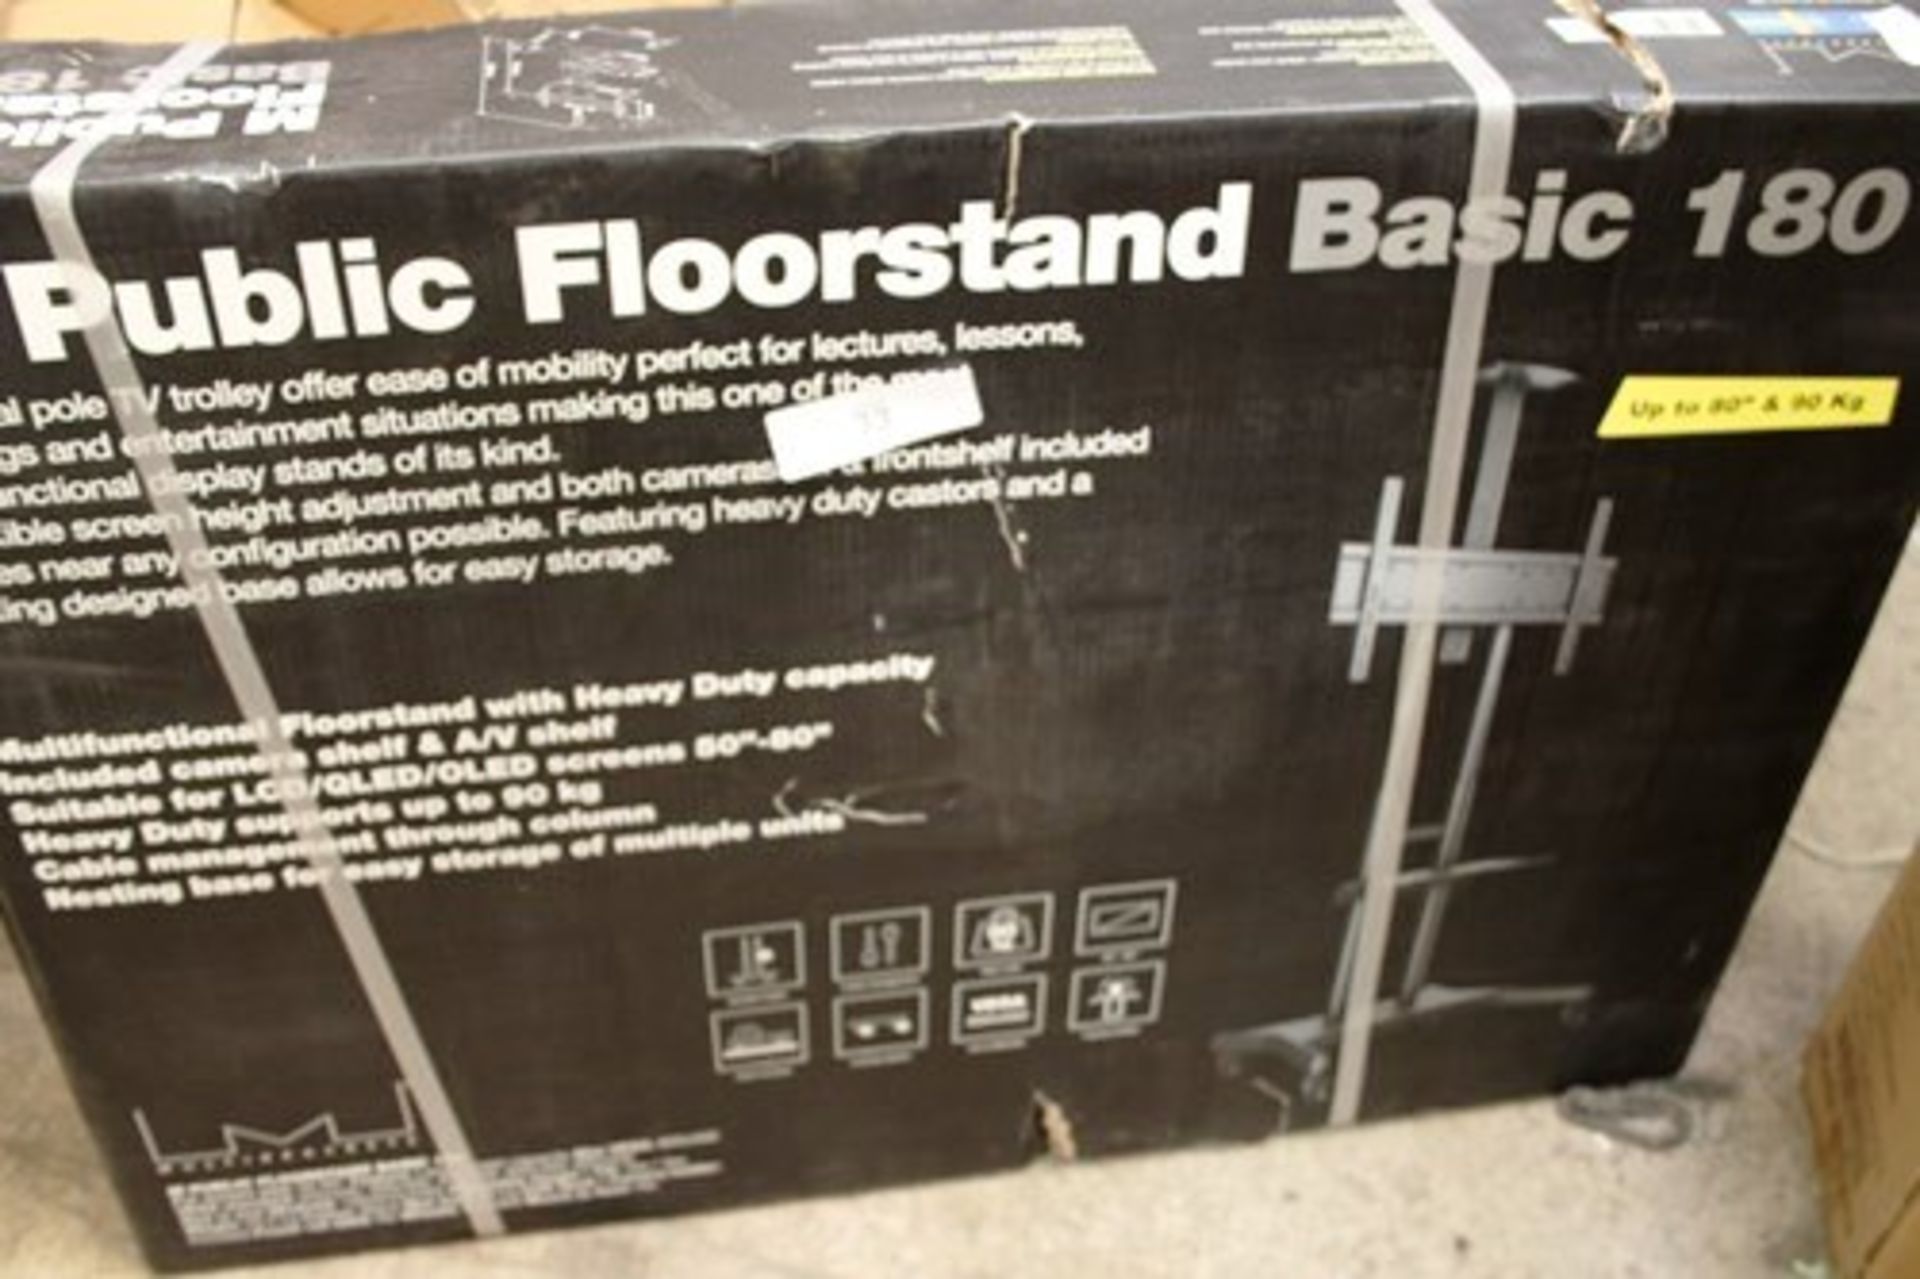 1 x M Public floor stand Basic 180, dual pole TV trolley, up to 80" and 90kg - New (ES2)